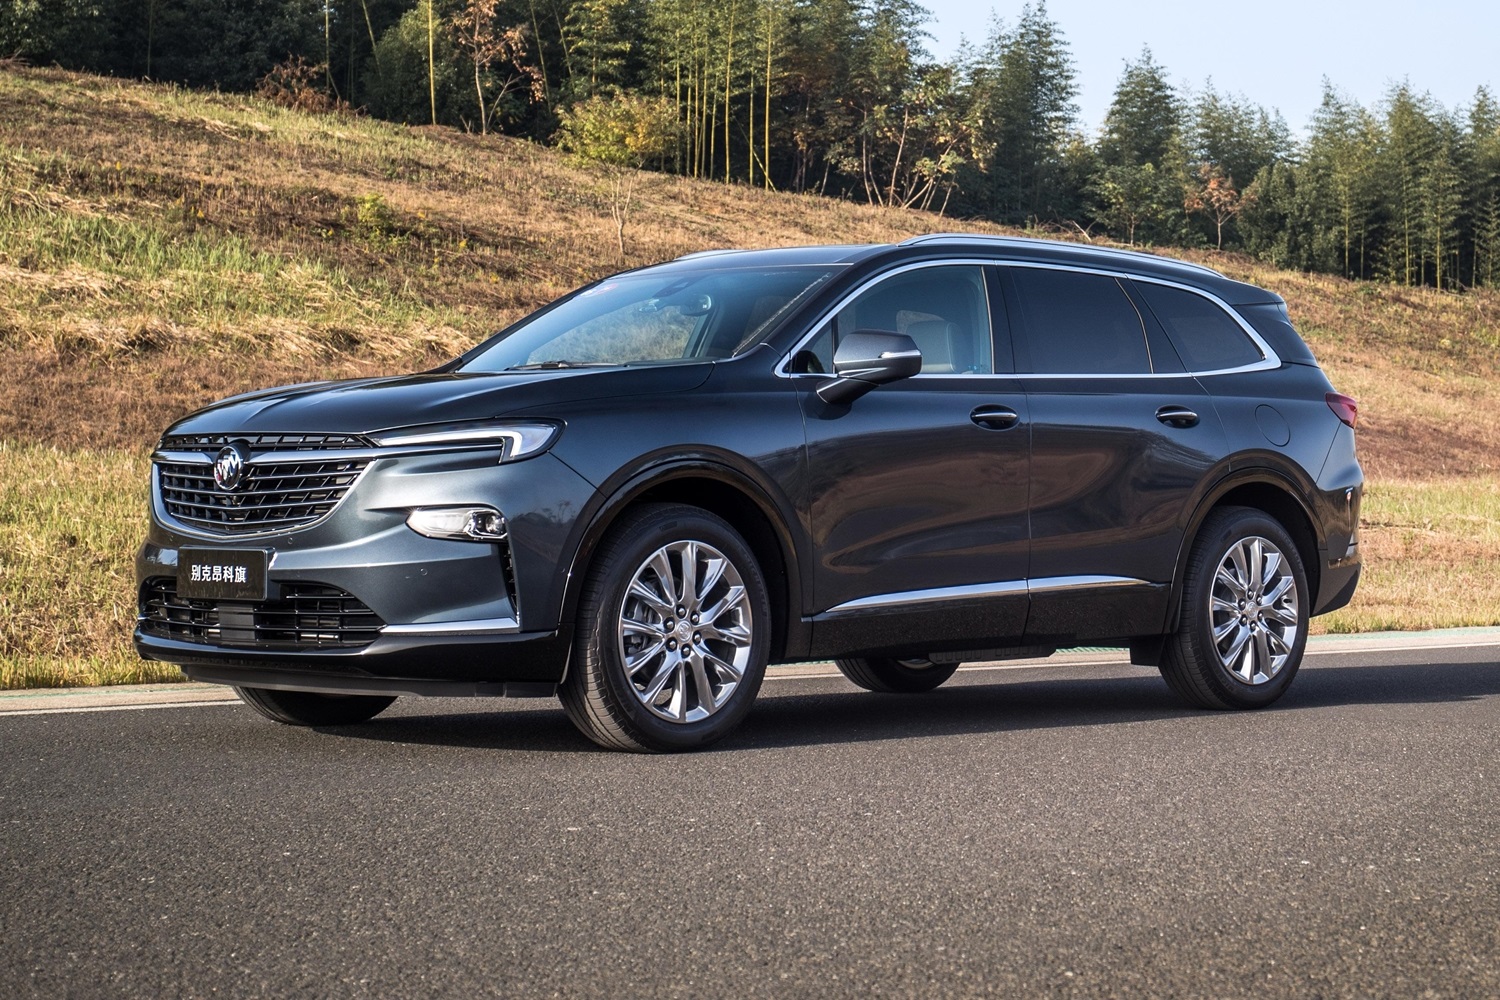 2021 Buick Enclave Gets New Entry-Level Trim In China | GM Authority